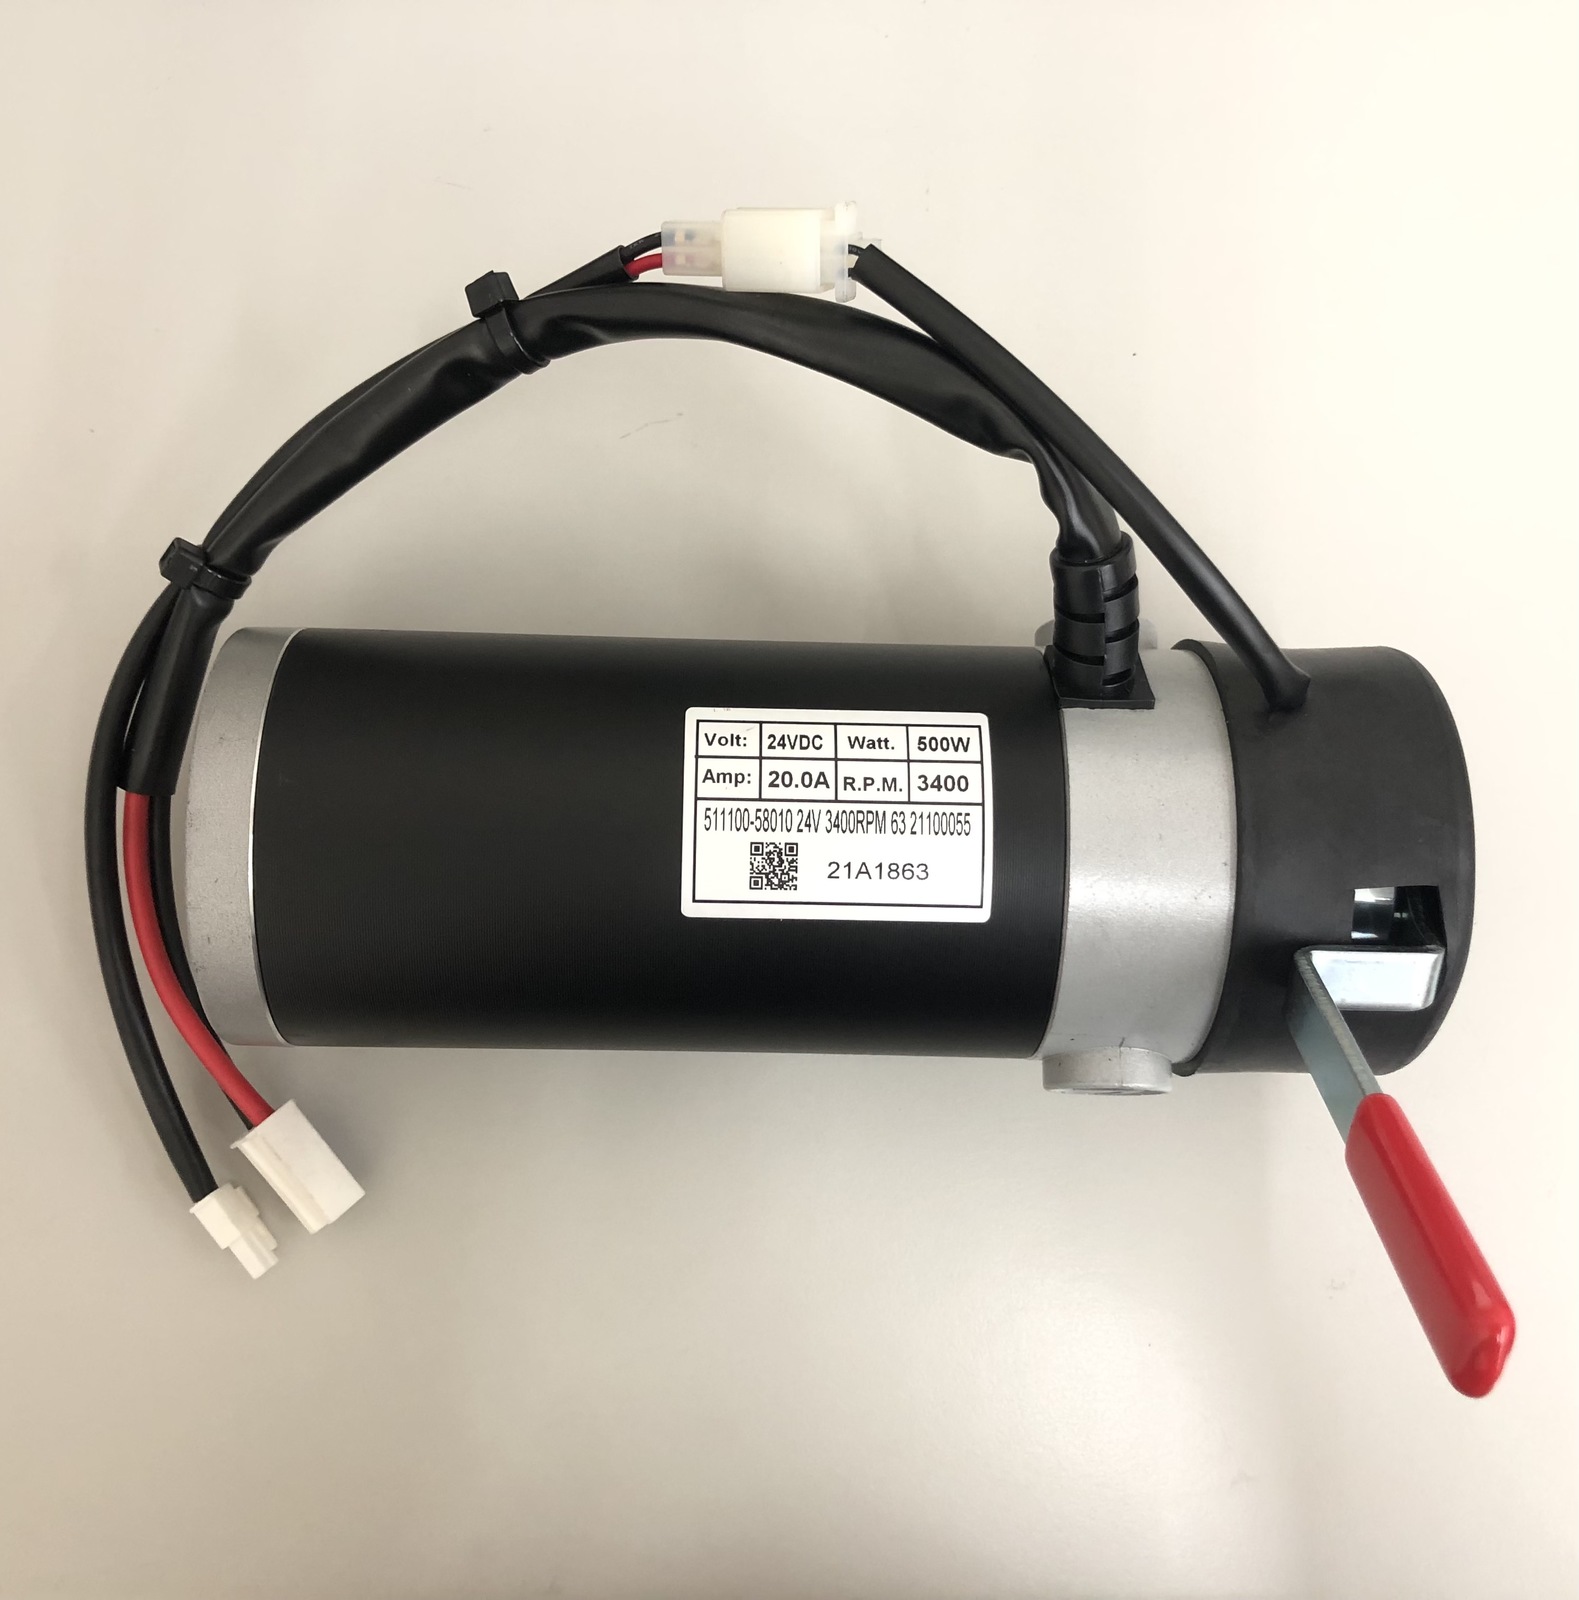 MSP Motor 511100-58010 incl. brake 2DX0X163004 CTM HS580 Taiwan mobility scooter